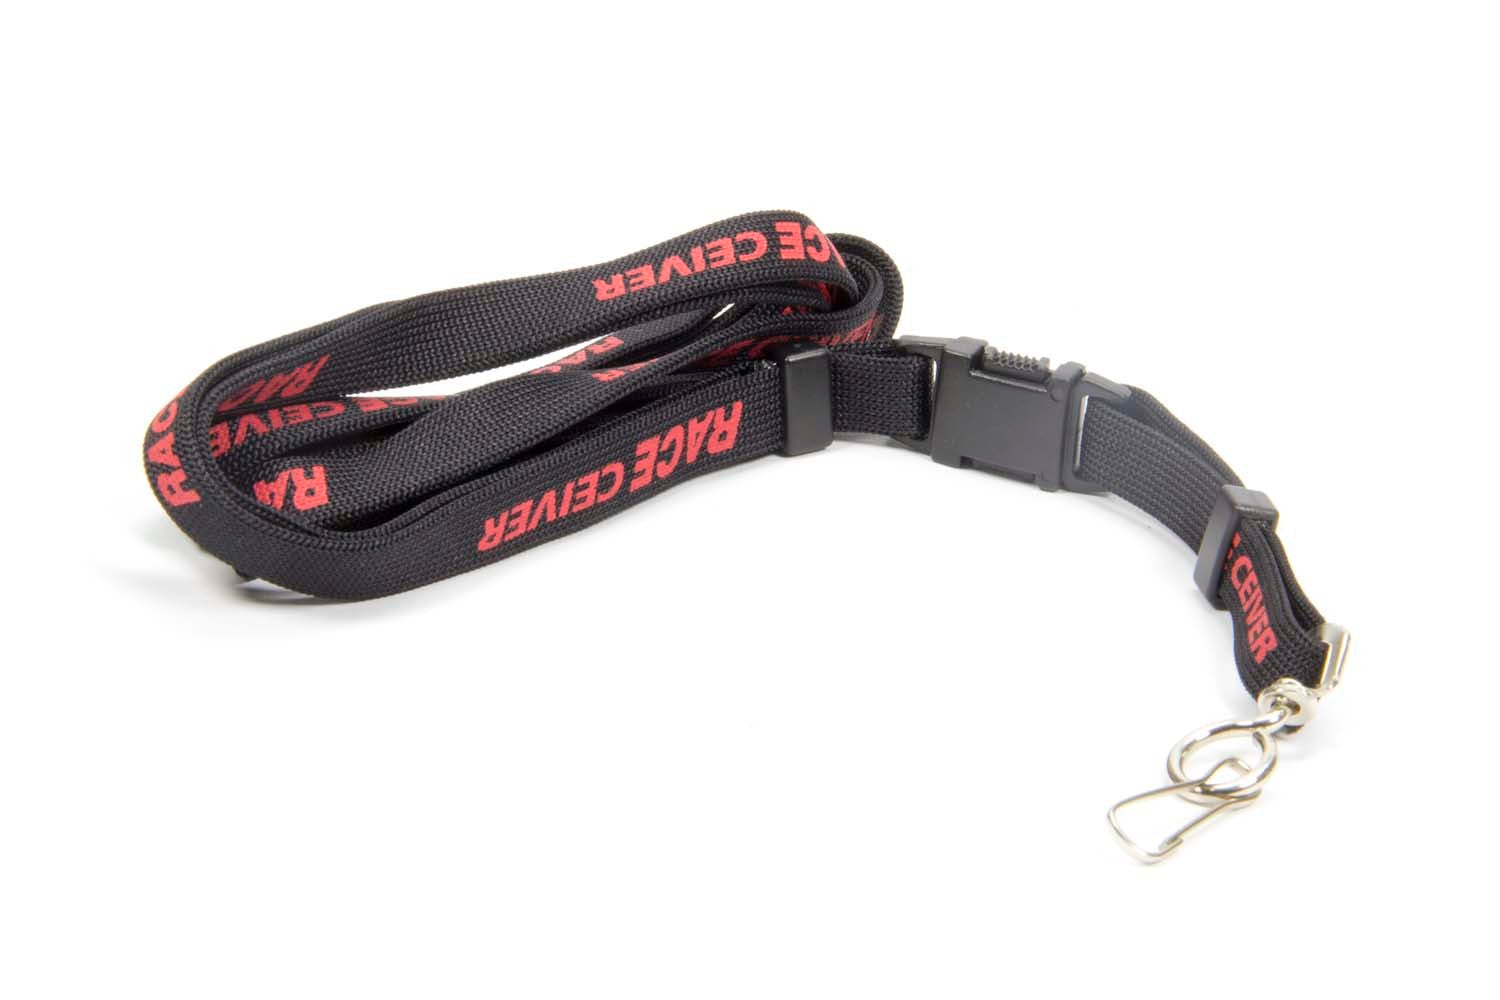 Raceceiver Detachable Lanyard for Raceceiver RCVLY100